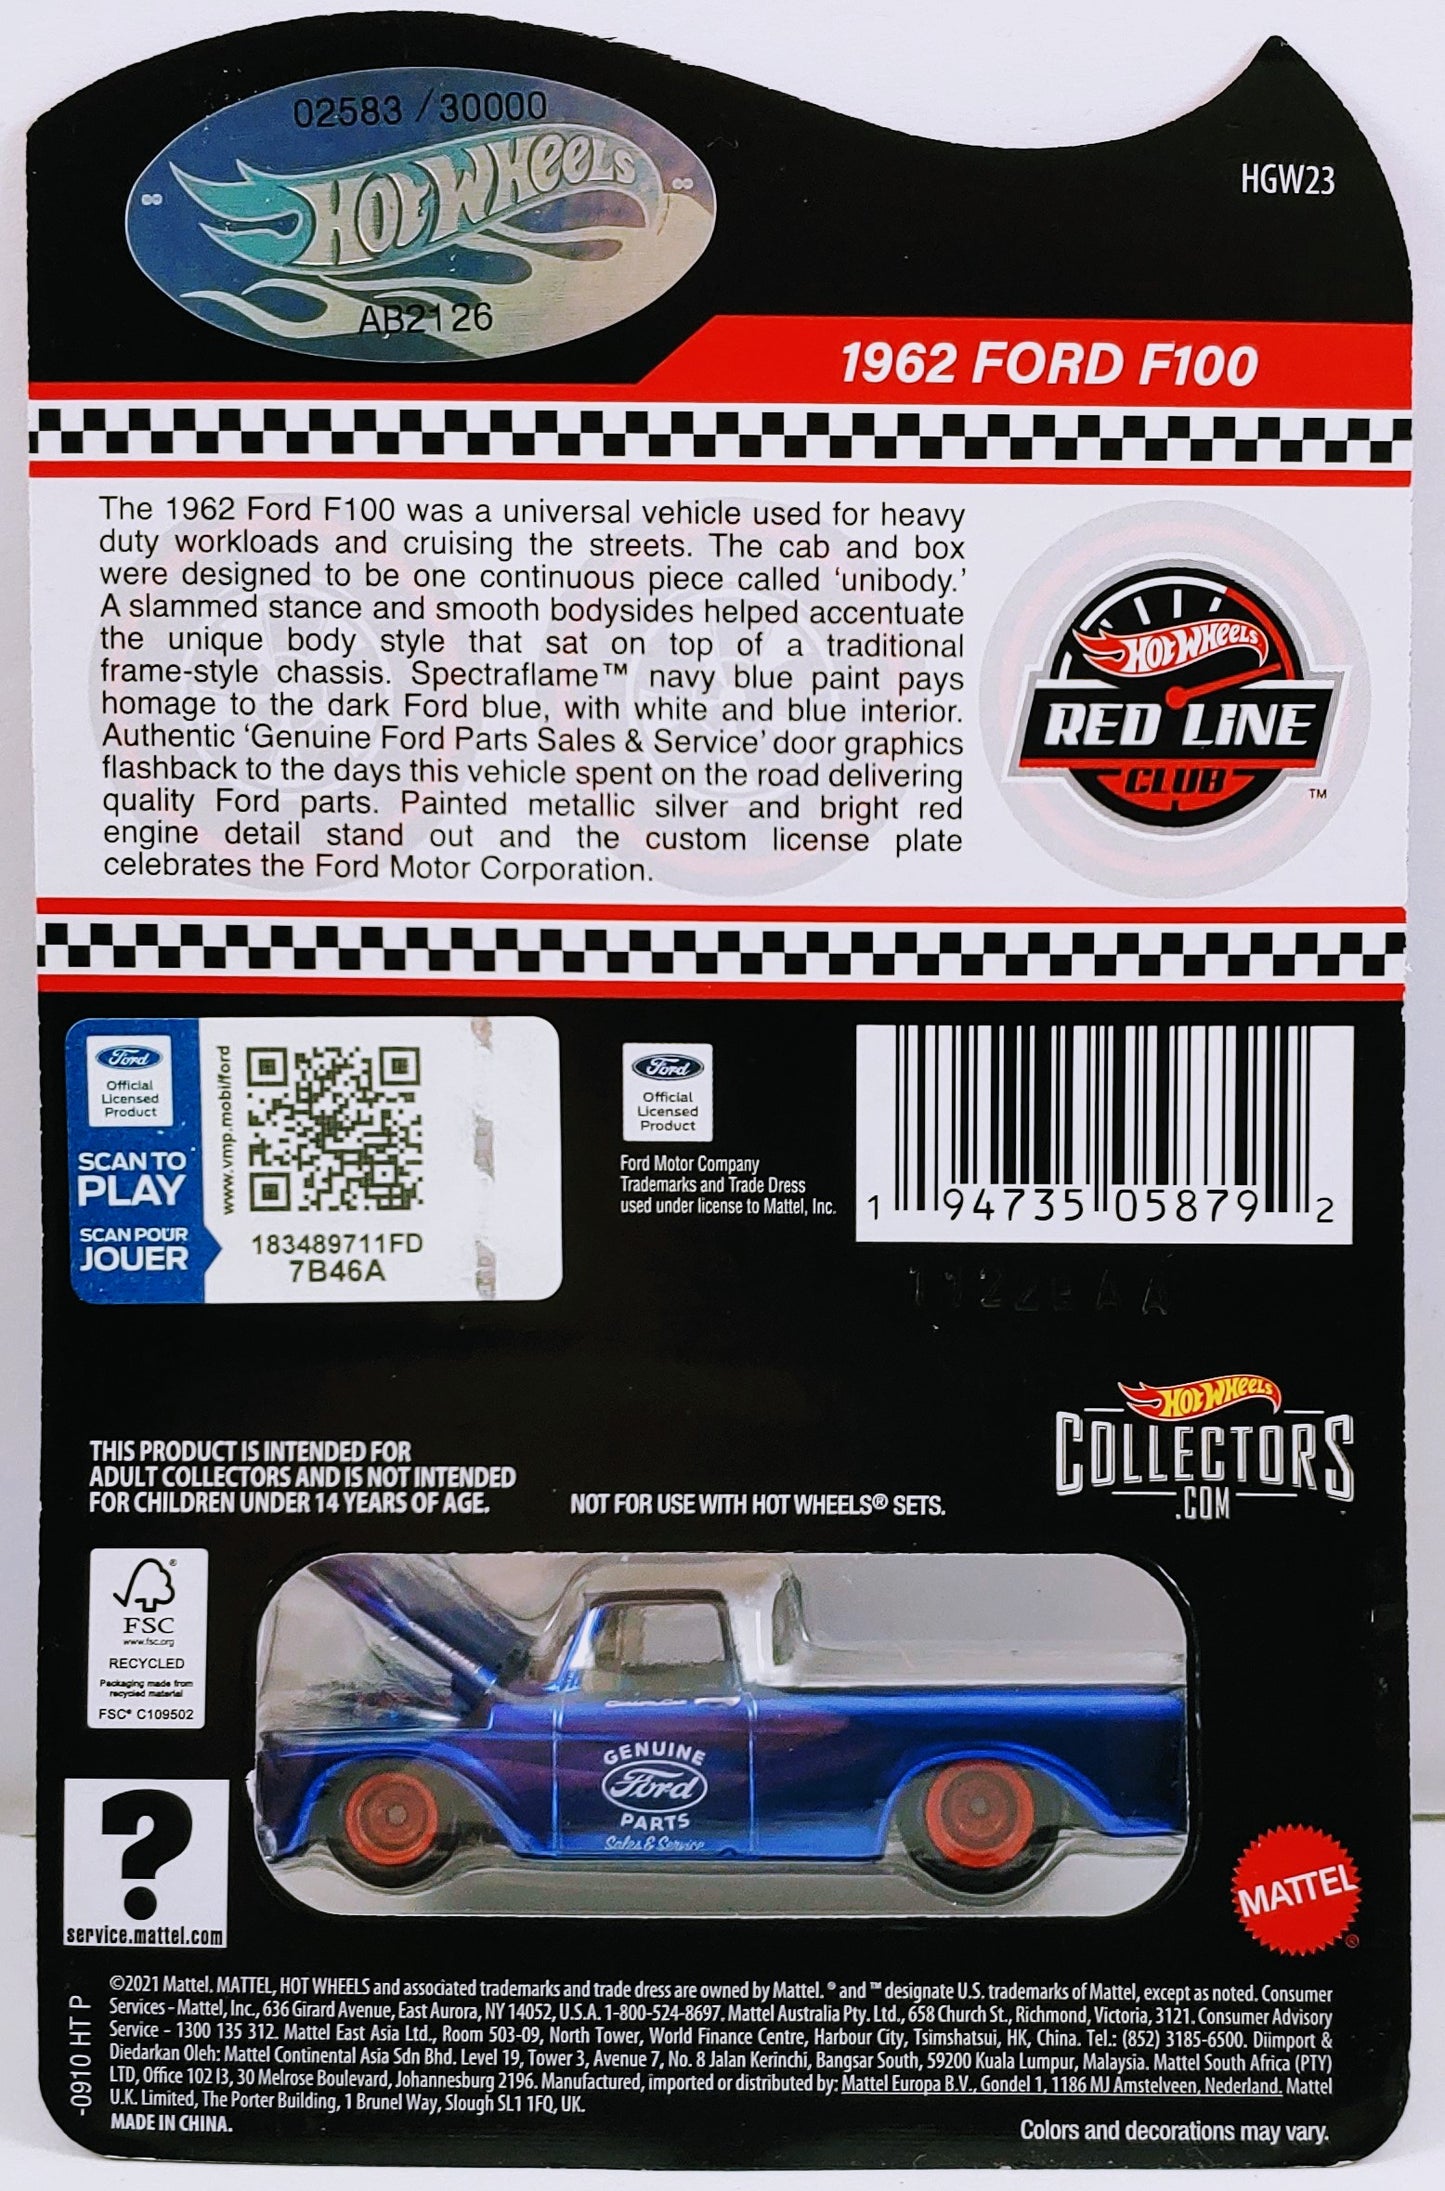 Hot Wheels 2022 - RLC Exclusive - 1962 Ford F100 - Spectraflame Blue - Metal/Metal & Real Riders - Limited to 30,000 - Kar Keeper